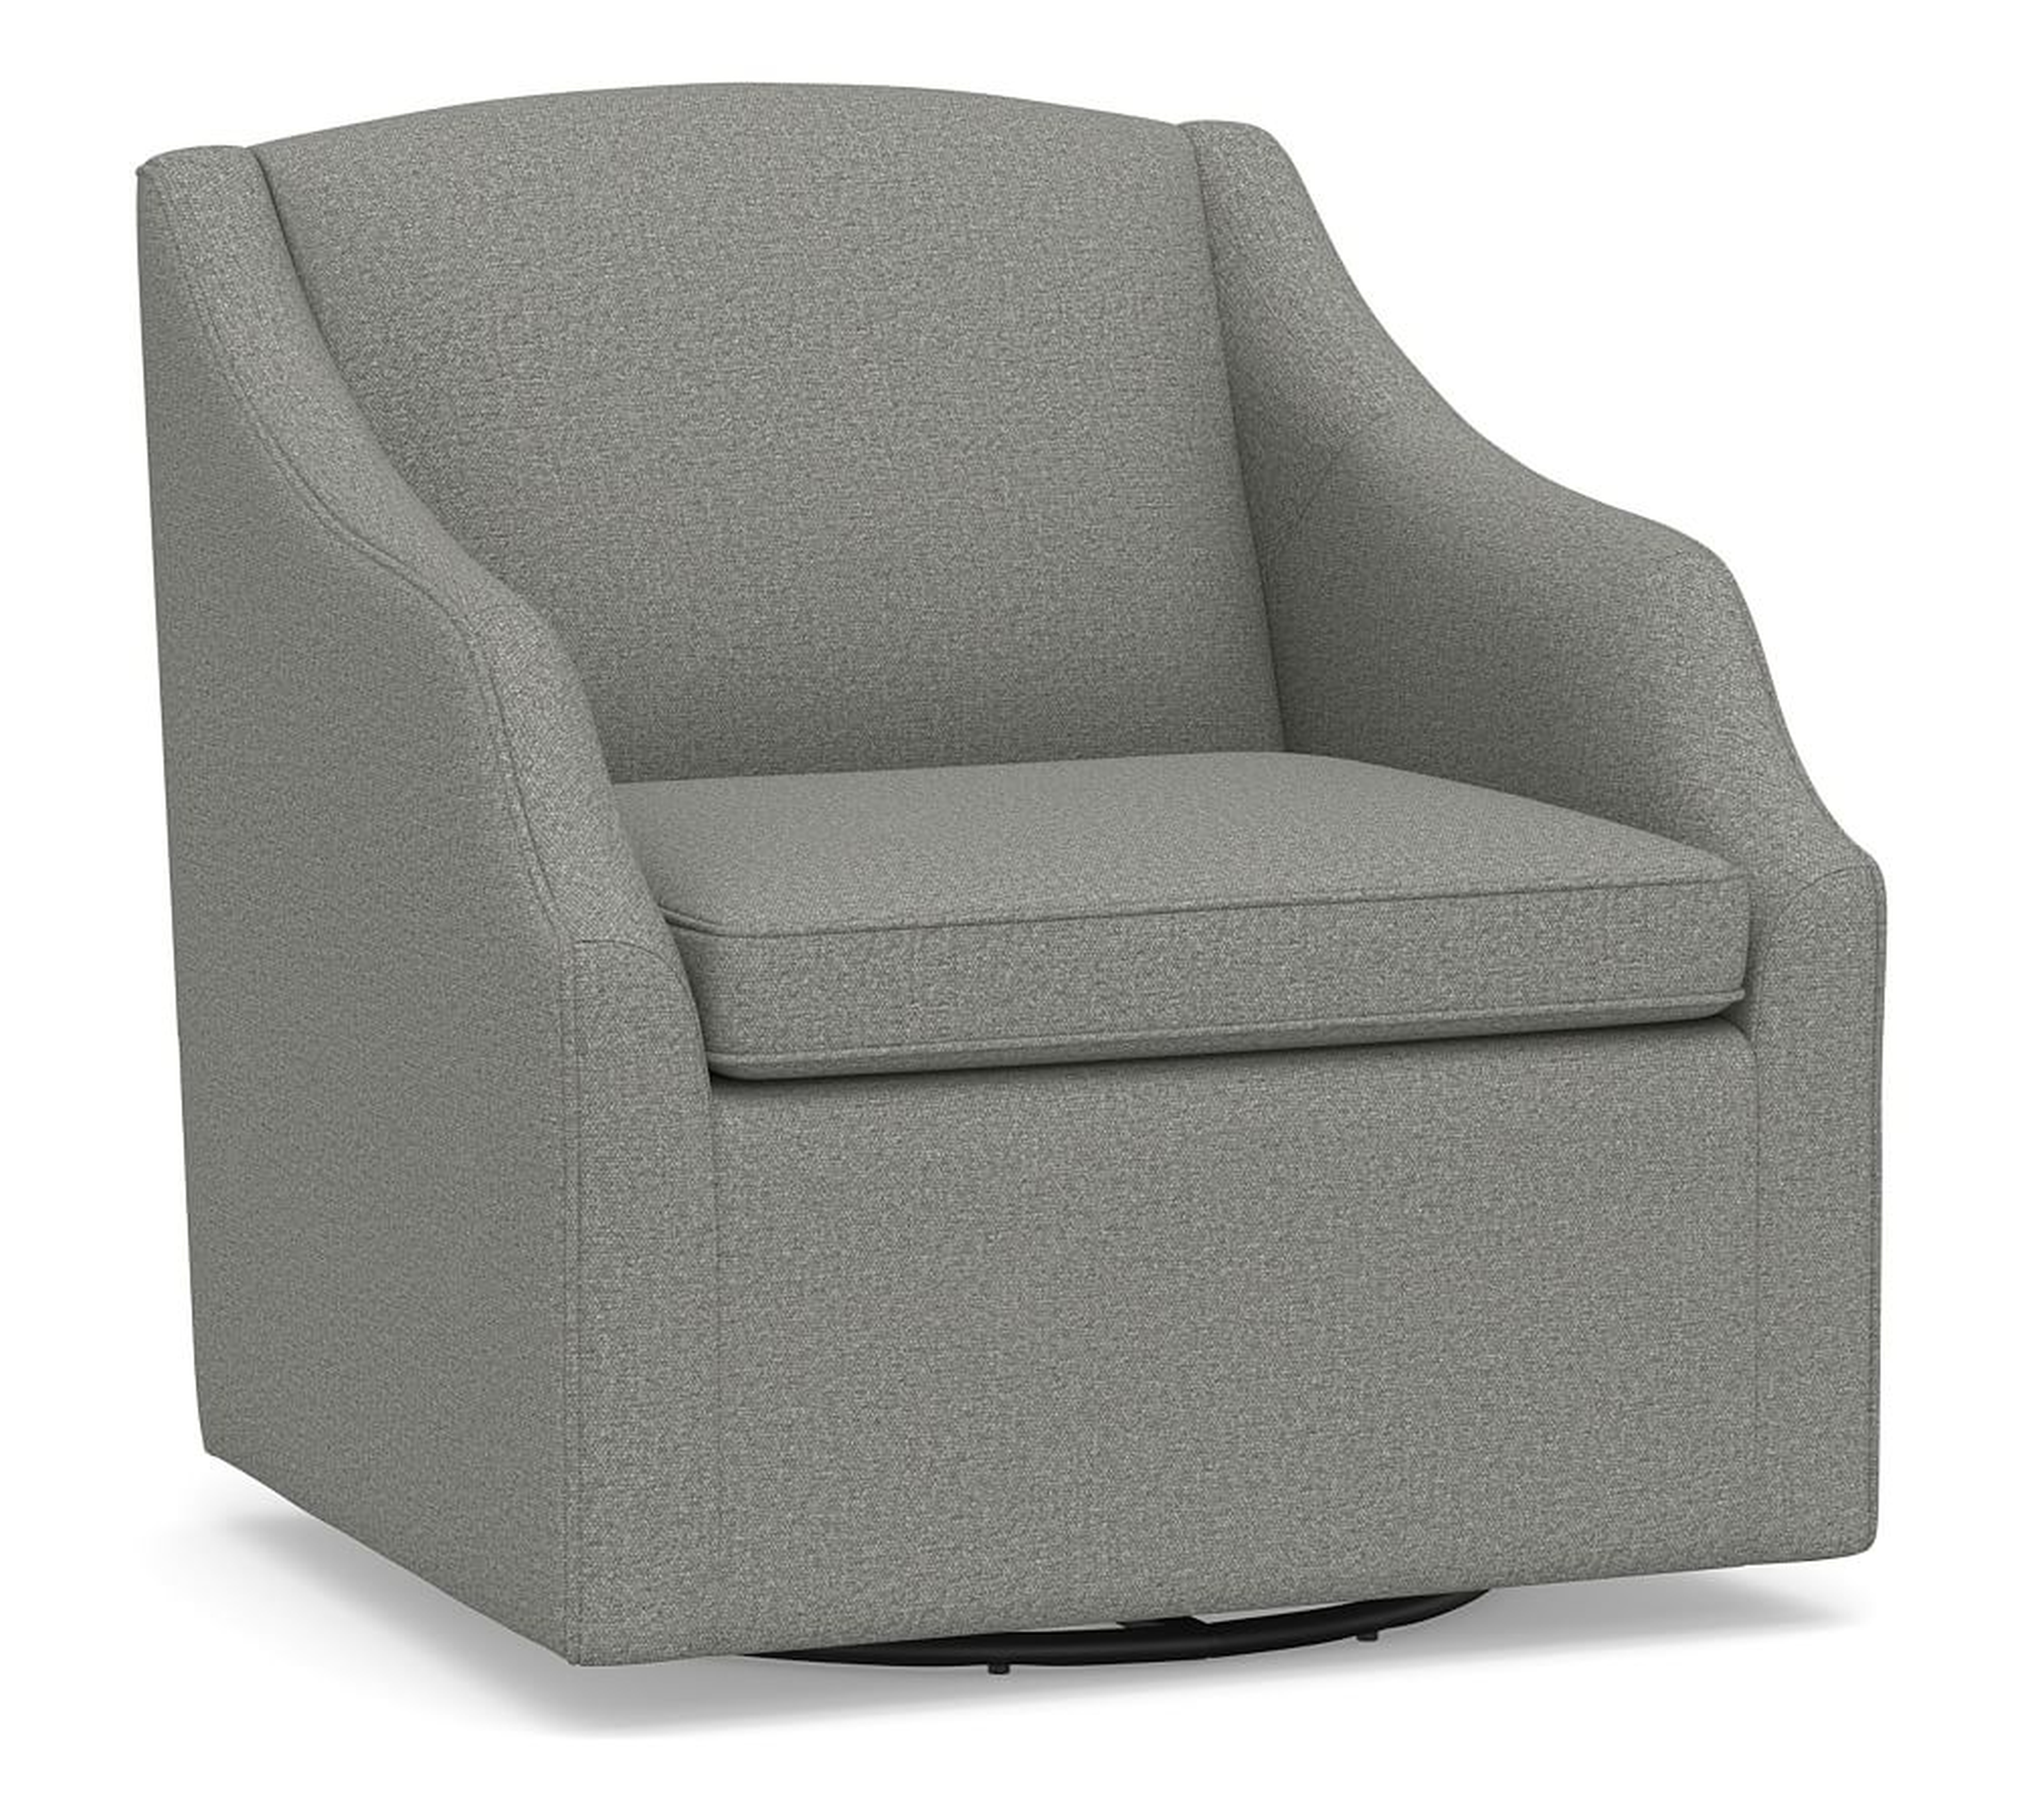 SoMa Emma Upholstered Swivel Armchair, Polyester Wrapped Cushions, Heathered Chenille Charcoal - Pottery Barn